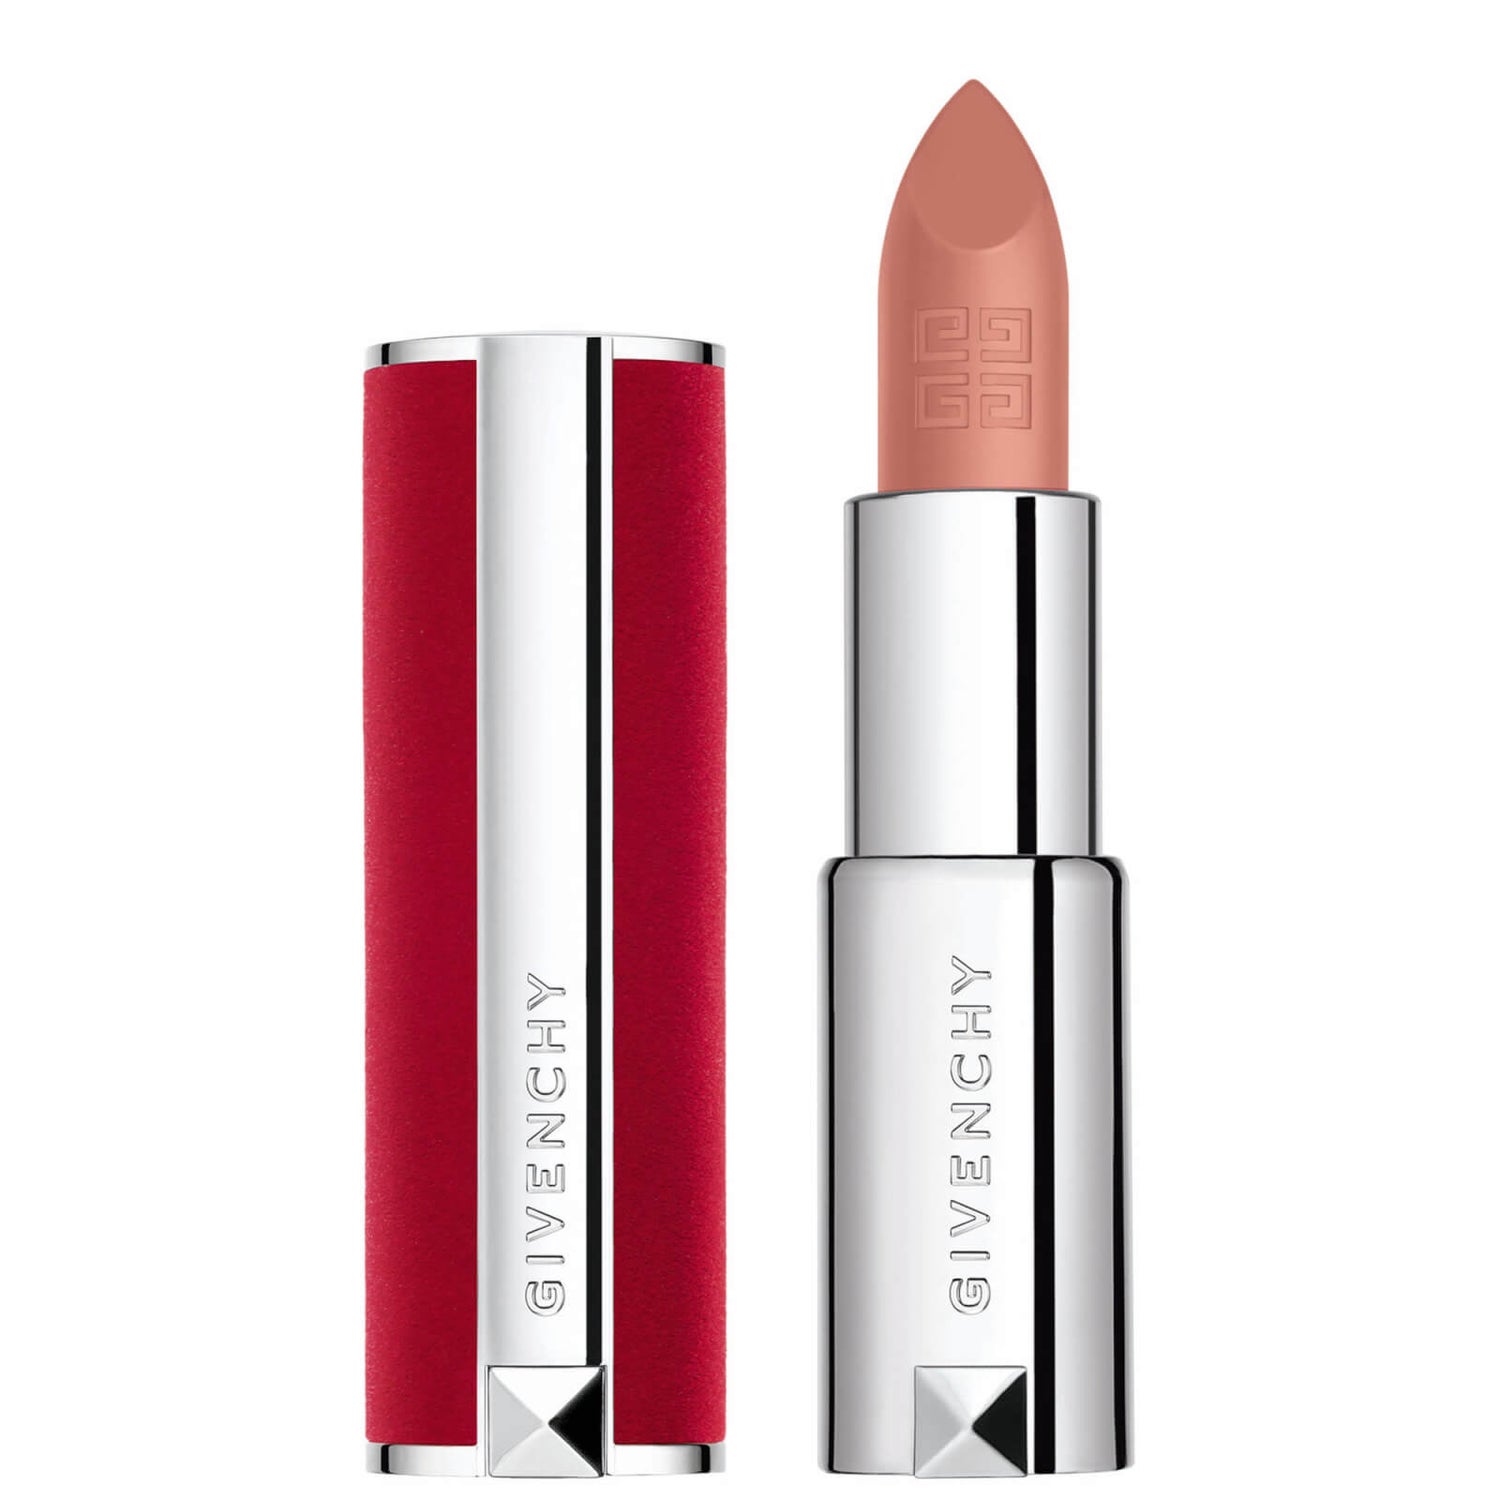 Givenchy Le Rouge Deep Velvet Lipstick 3.4g (Various Shades)